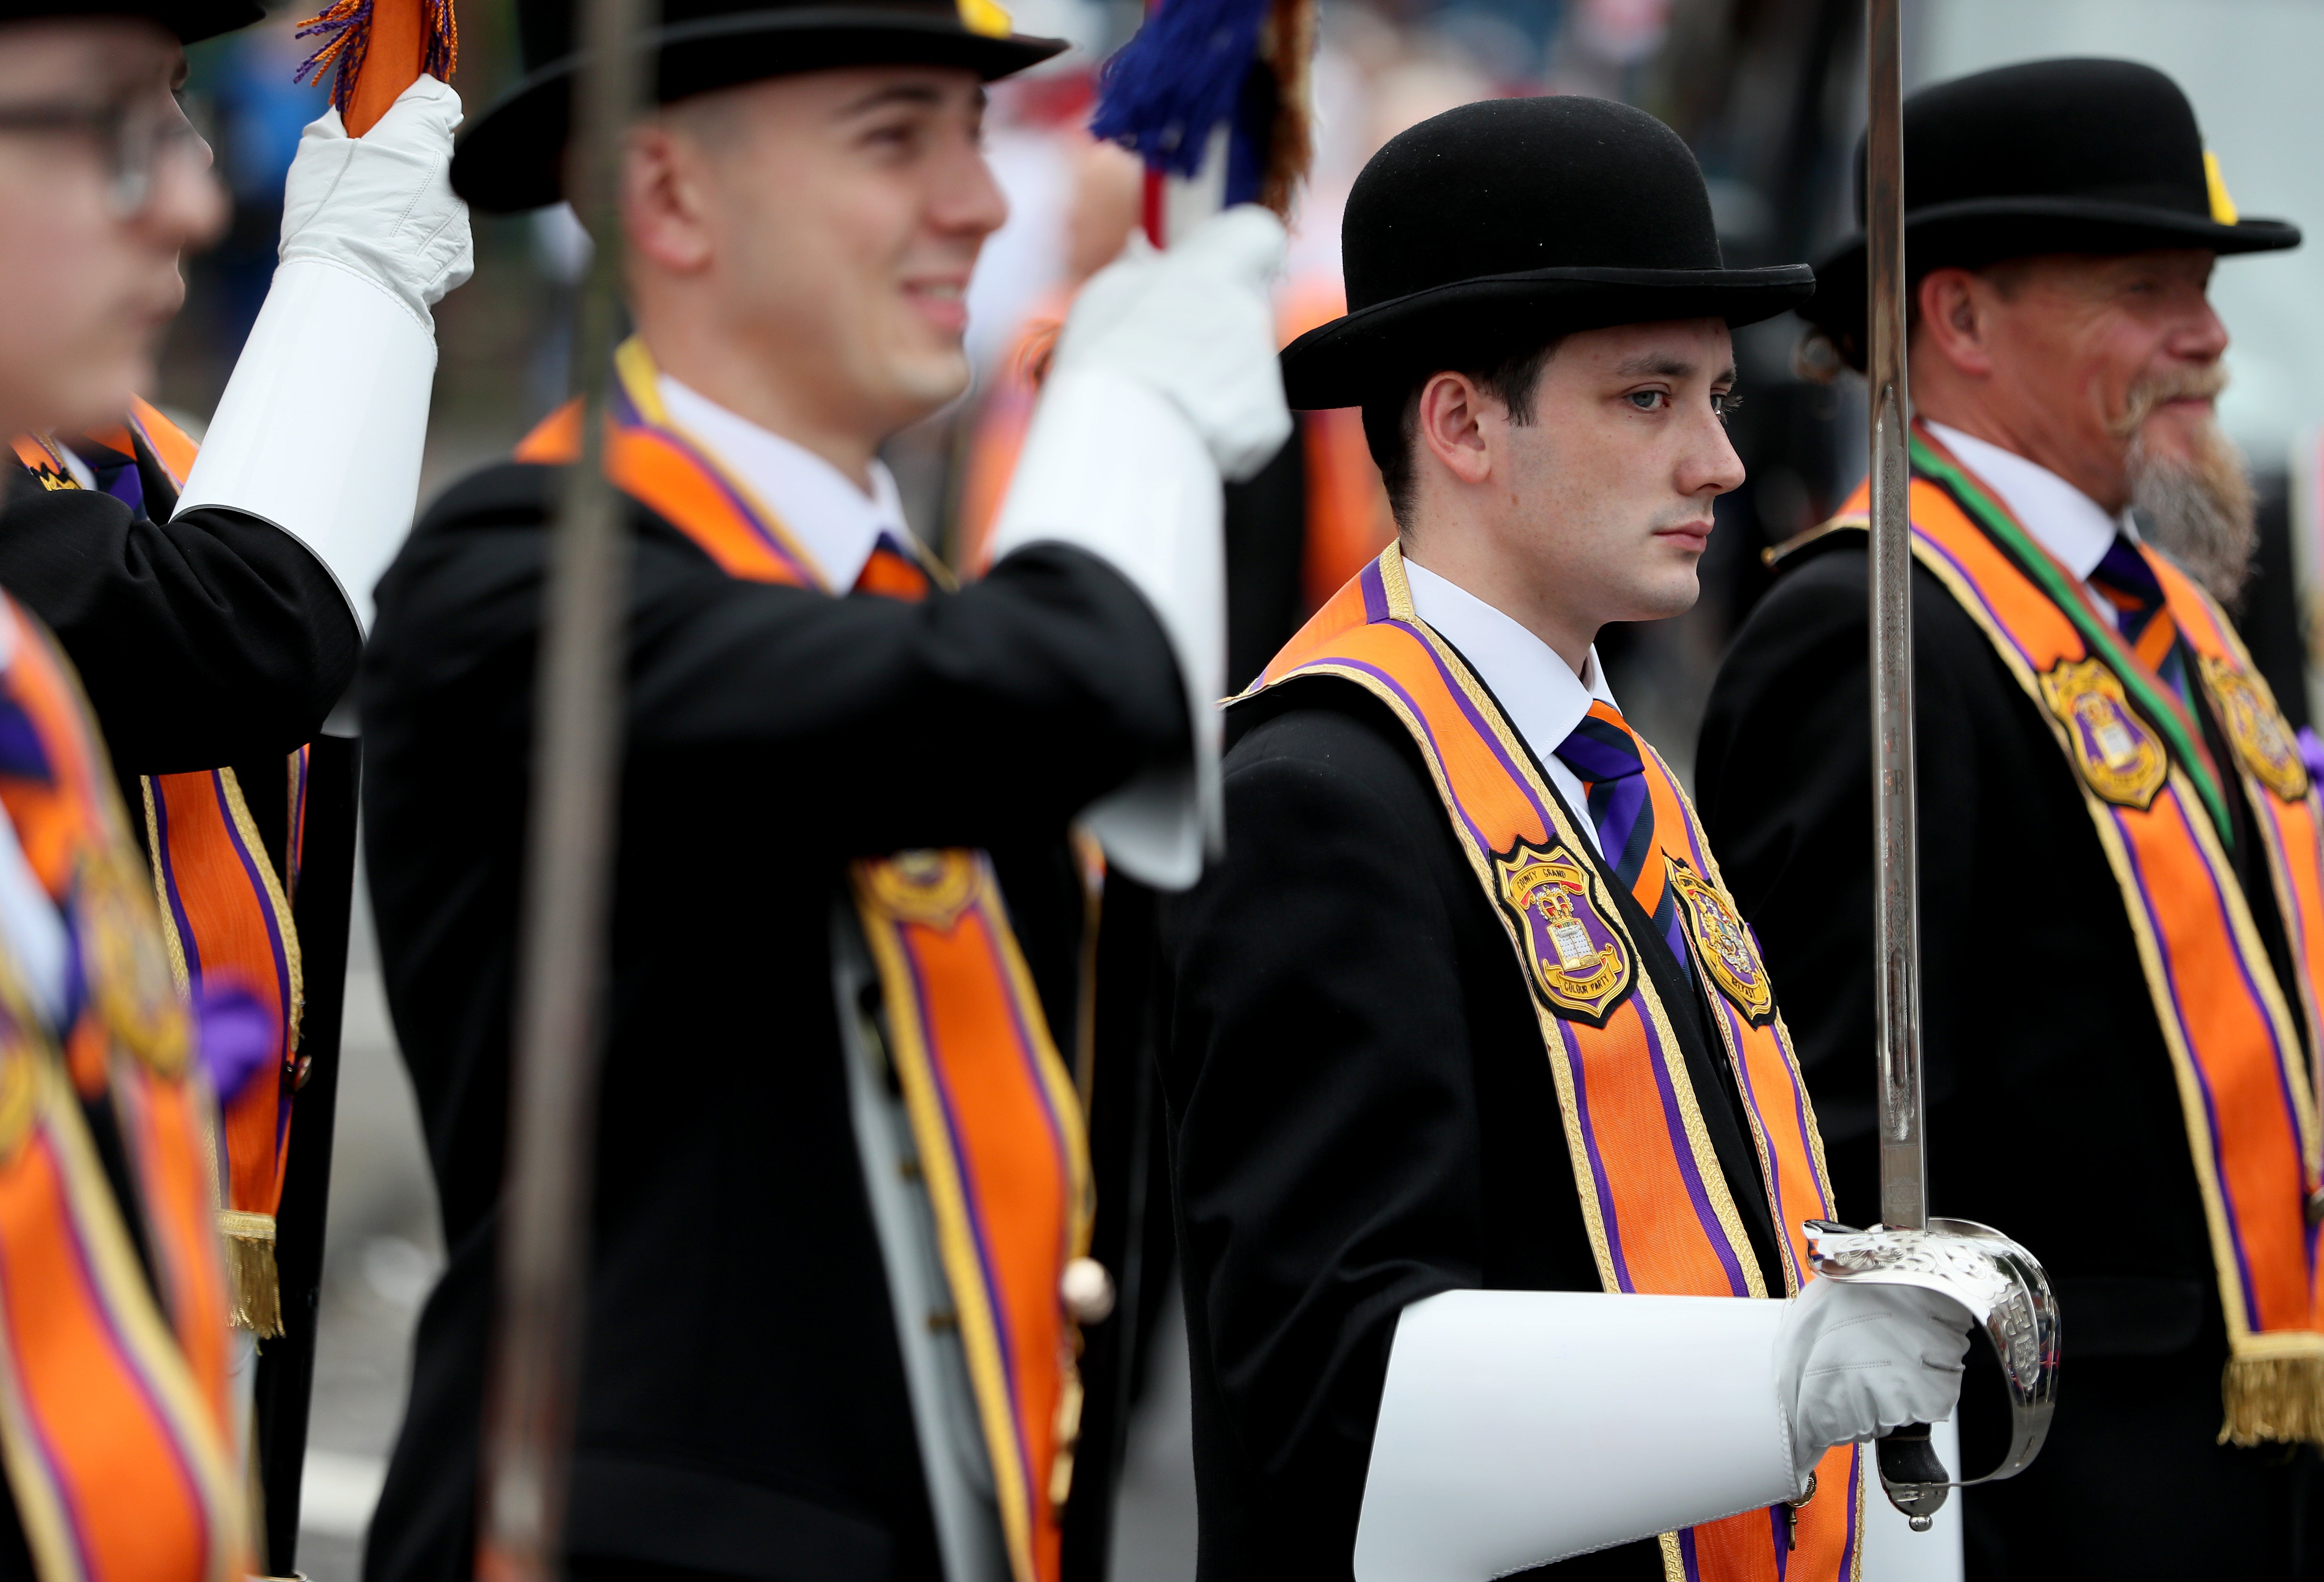 Hundreds of parades will take place across Northern Ireland today as Protestant loyal orders celebrate the Twelfth of July (Brian Lawless/PA)